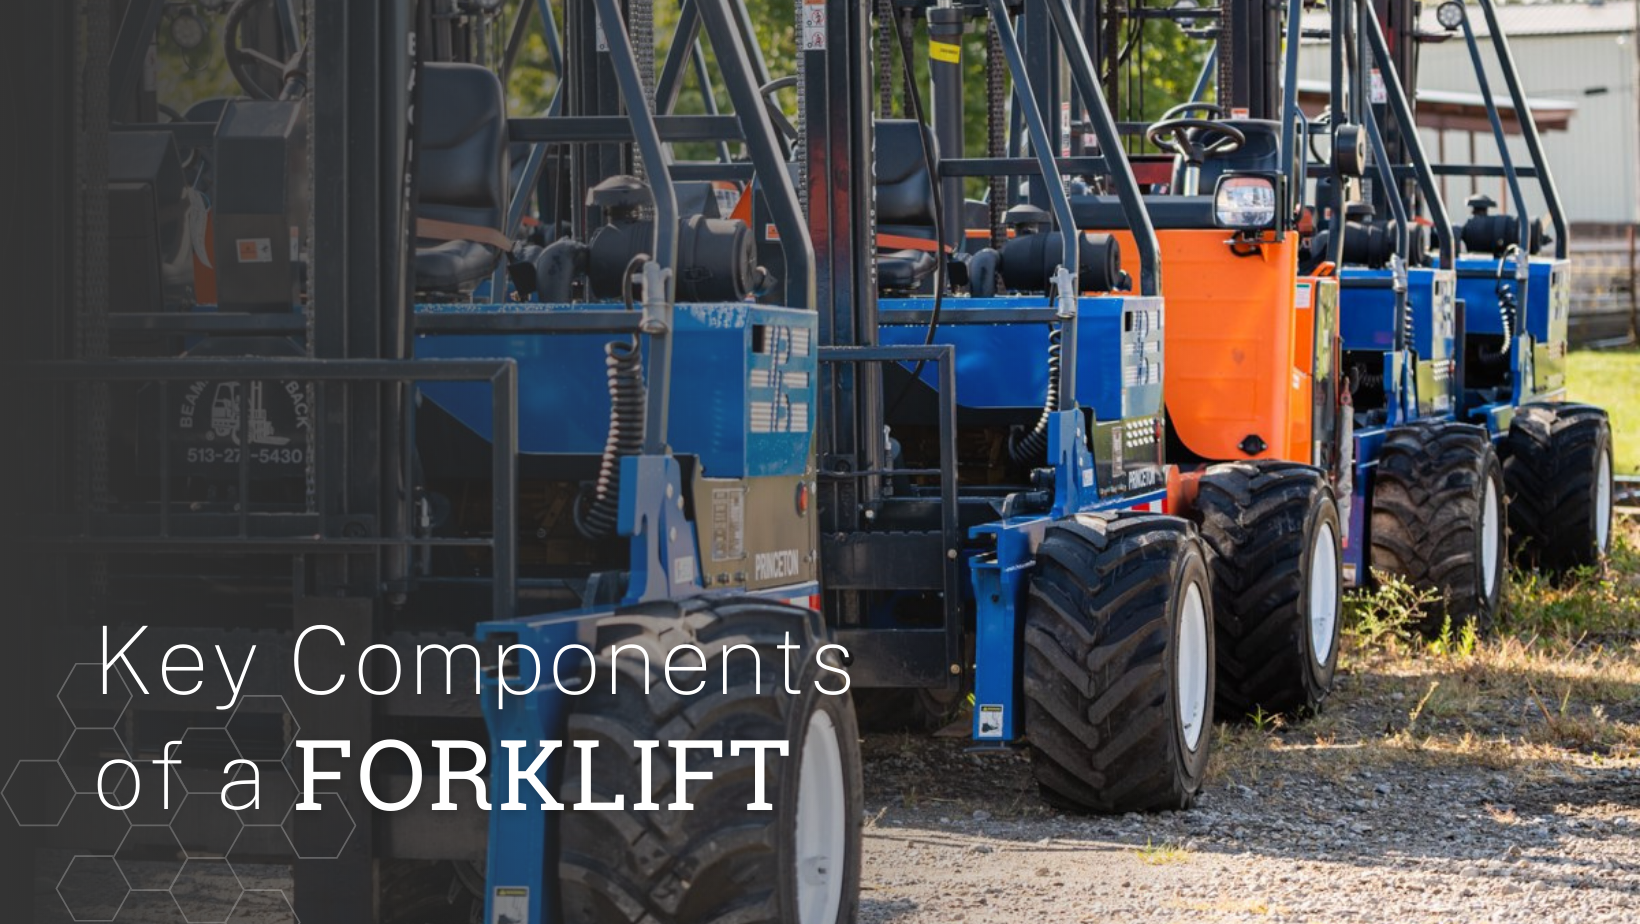 Forklifts are small industrial vehicles that are heavily used in warehouses and large storage facilities to lift, move, and transport heavy or bulky cargo. A unique power-operated fork platform is attached at the front of the vehicle that can be used to raise or lower cargo.  